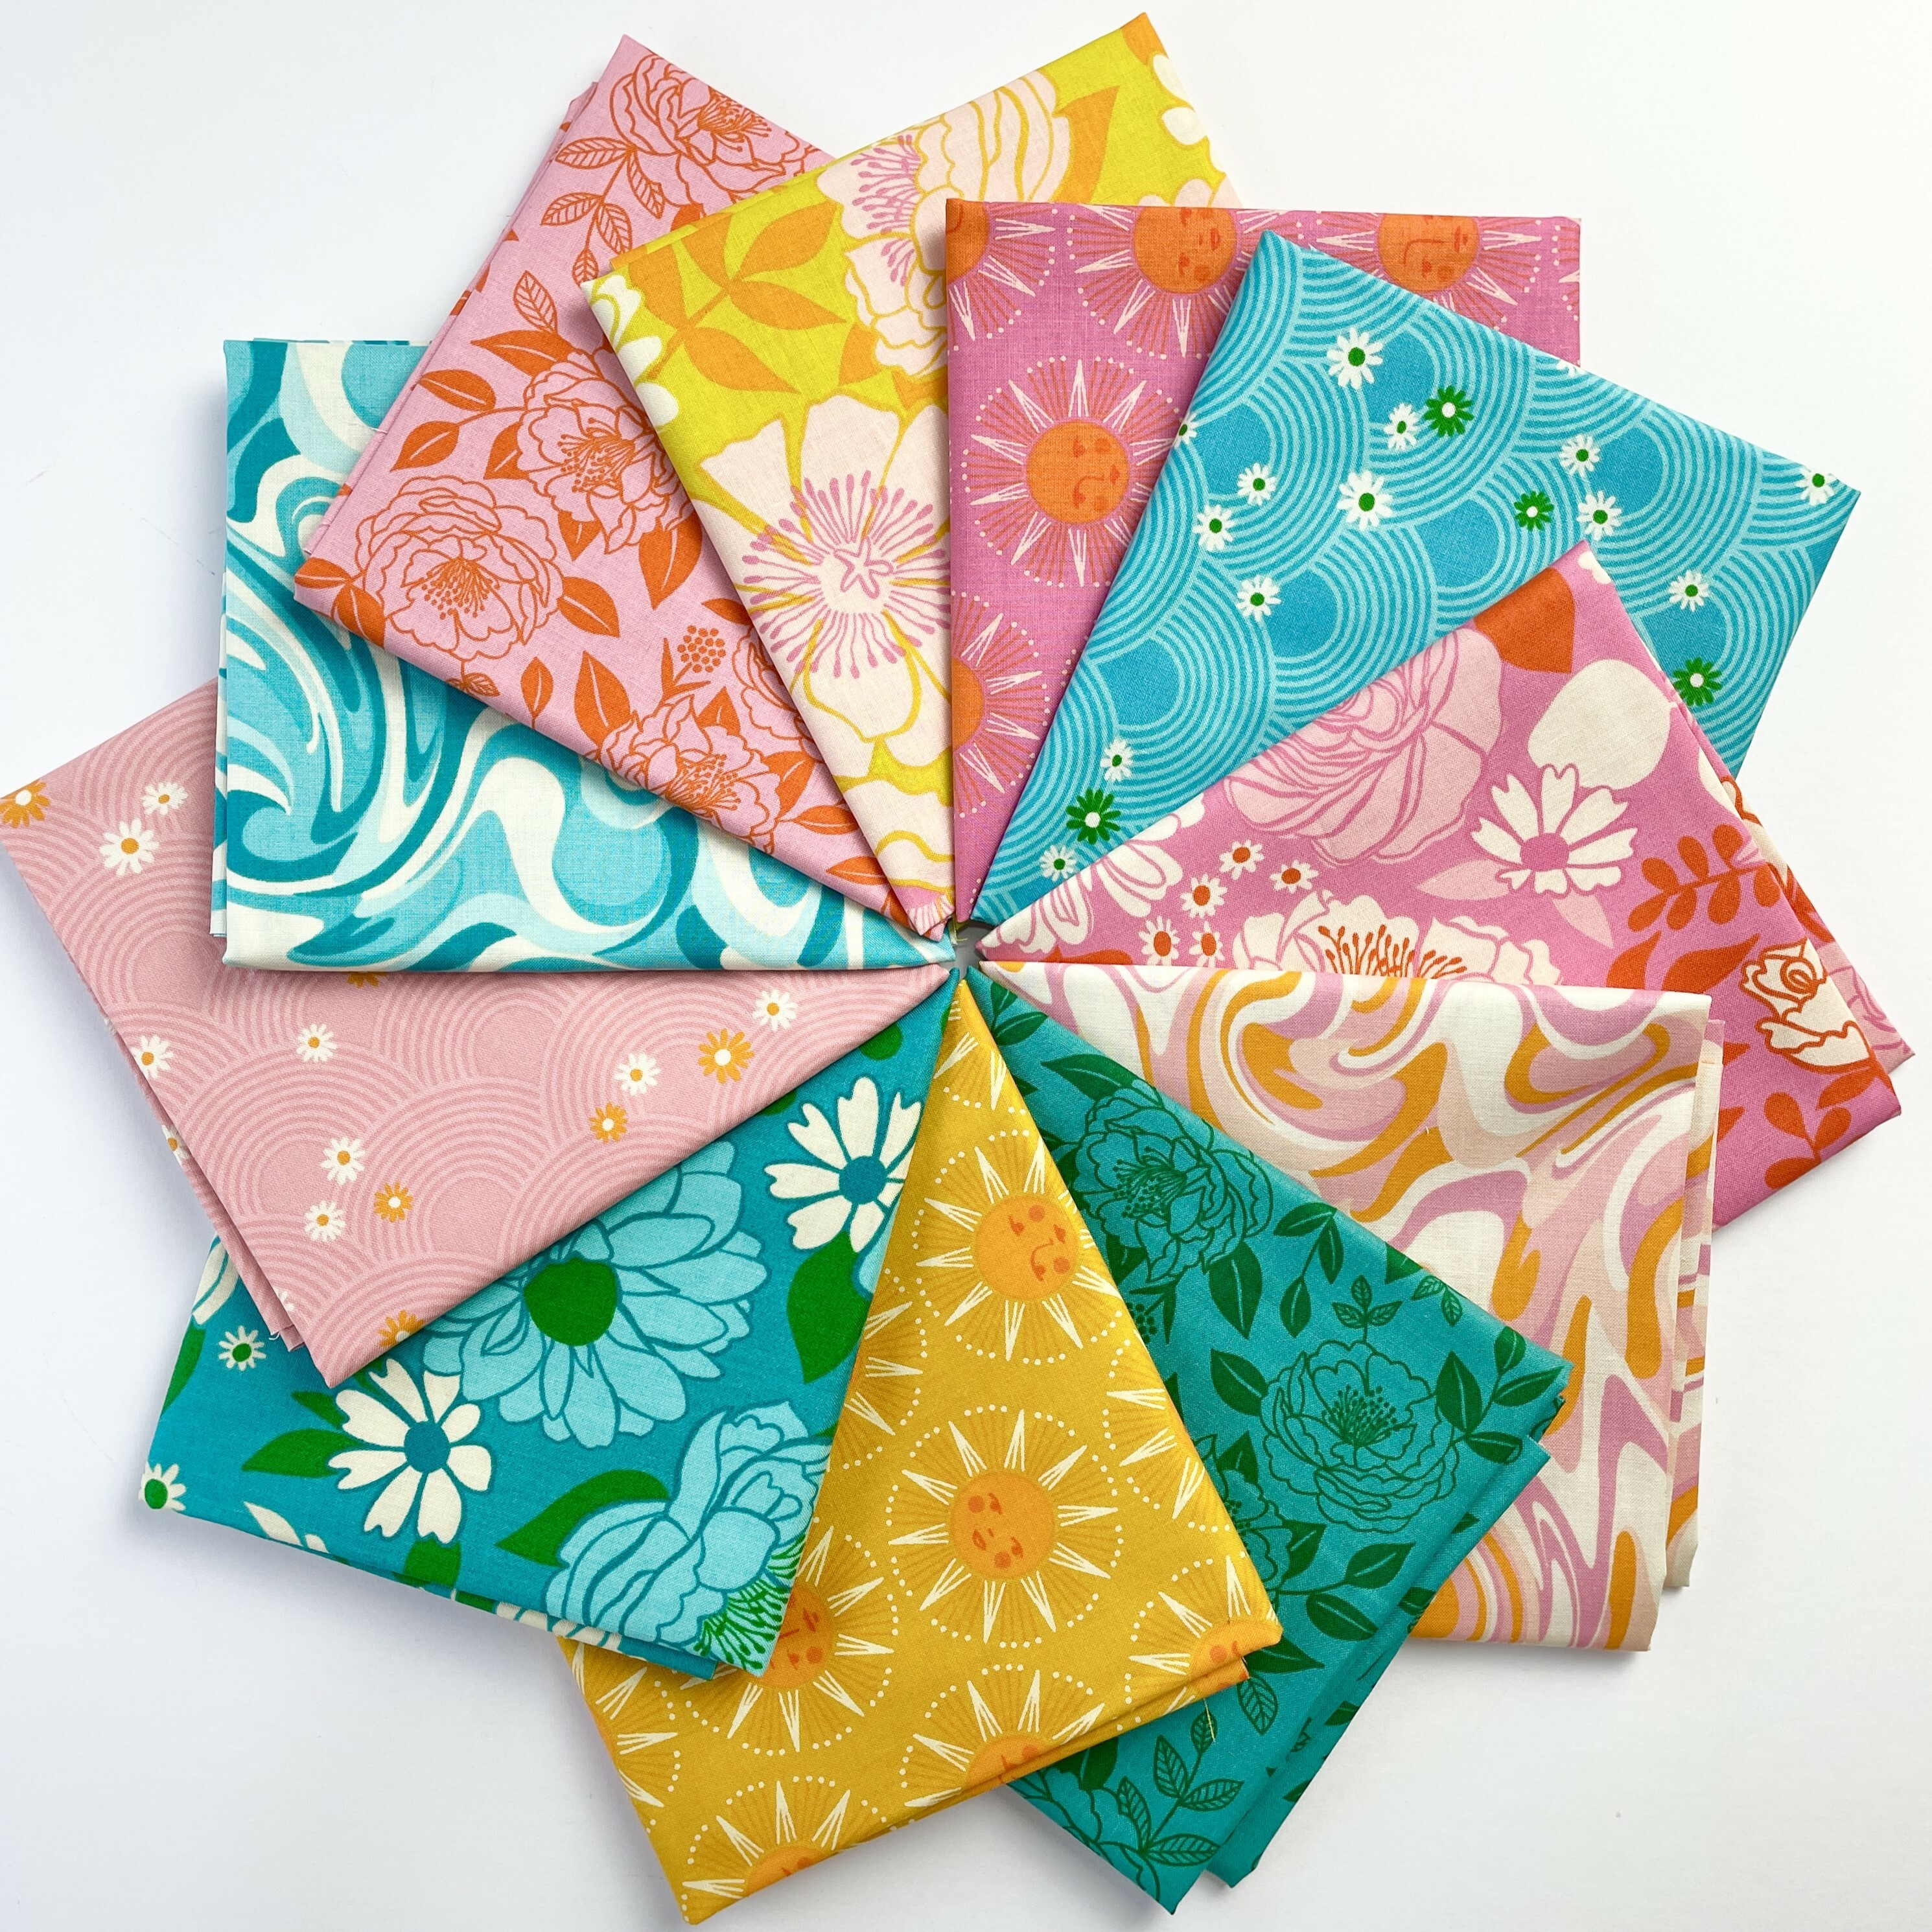 Modern patchwork and quilting fabric from the Rise and Shine collection designed by Melody Miller for Ruby Star Society